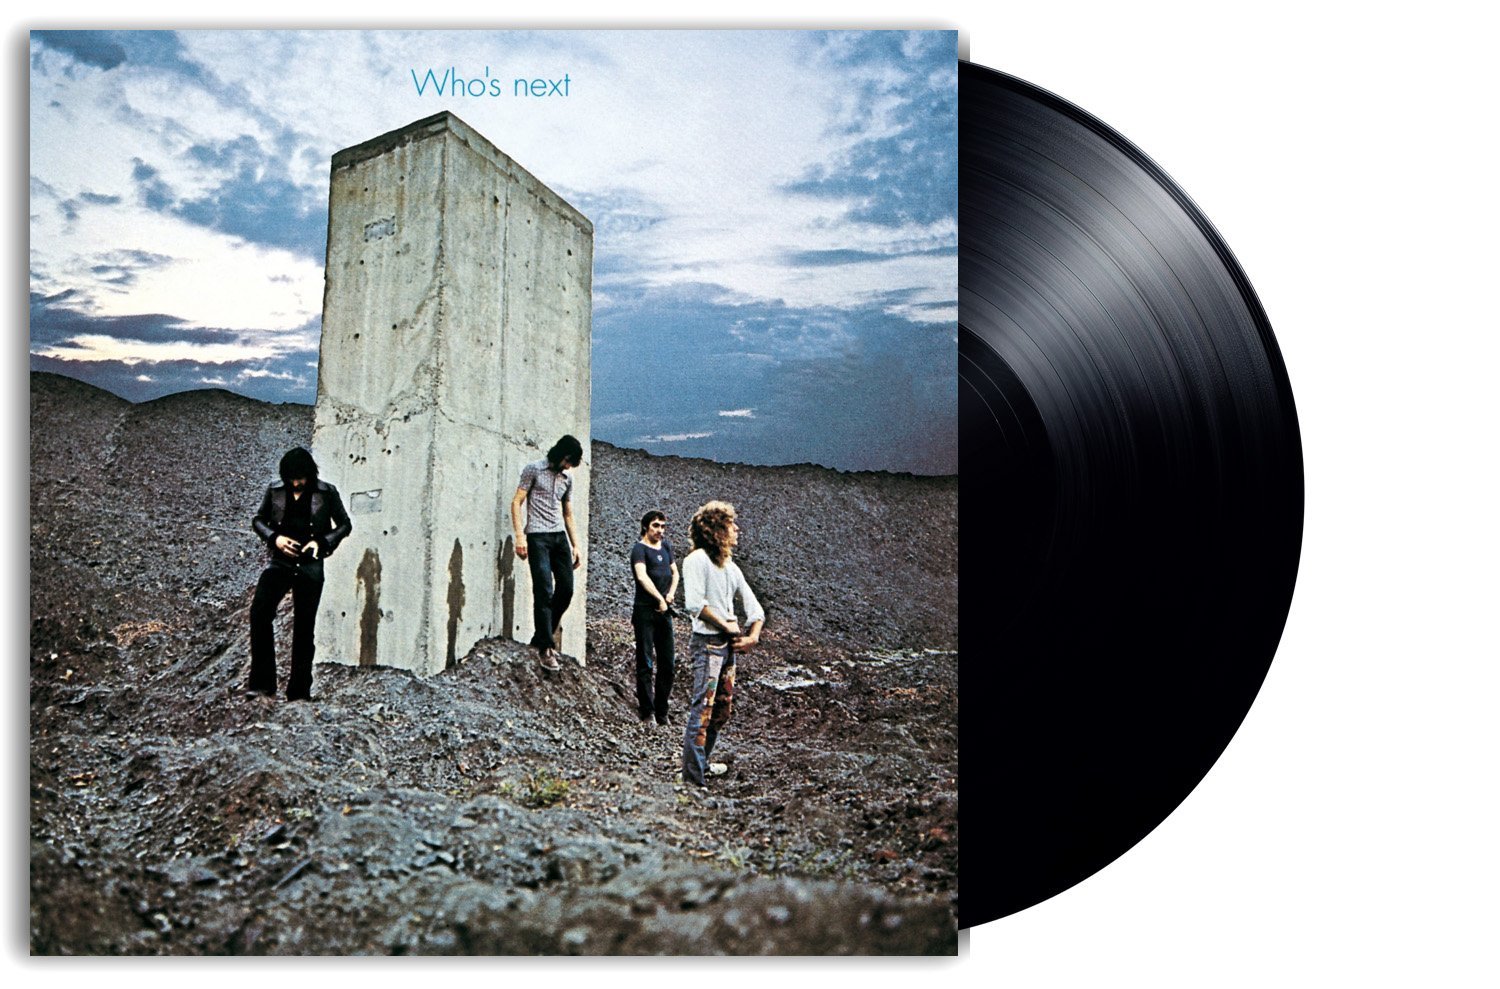 Albums the who. The who behind Blue Eyes. Who's next. The who "who's next, CD". The who Vinyl.